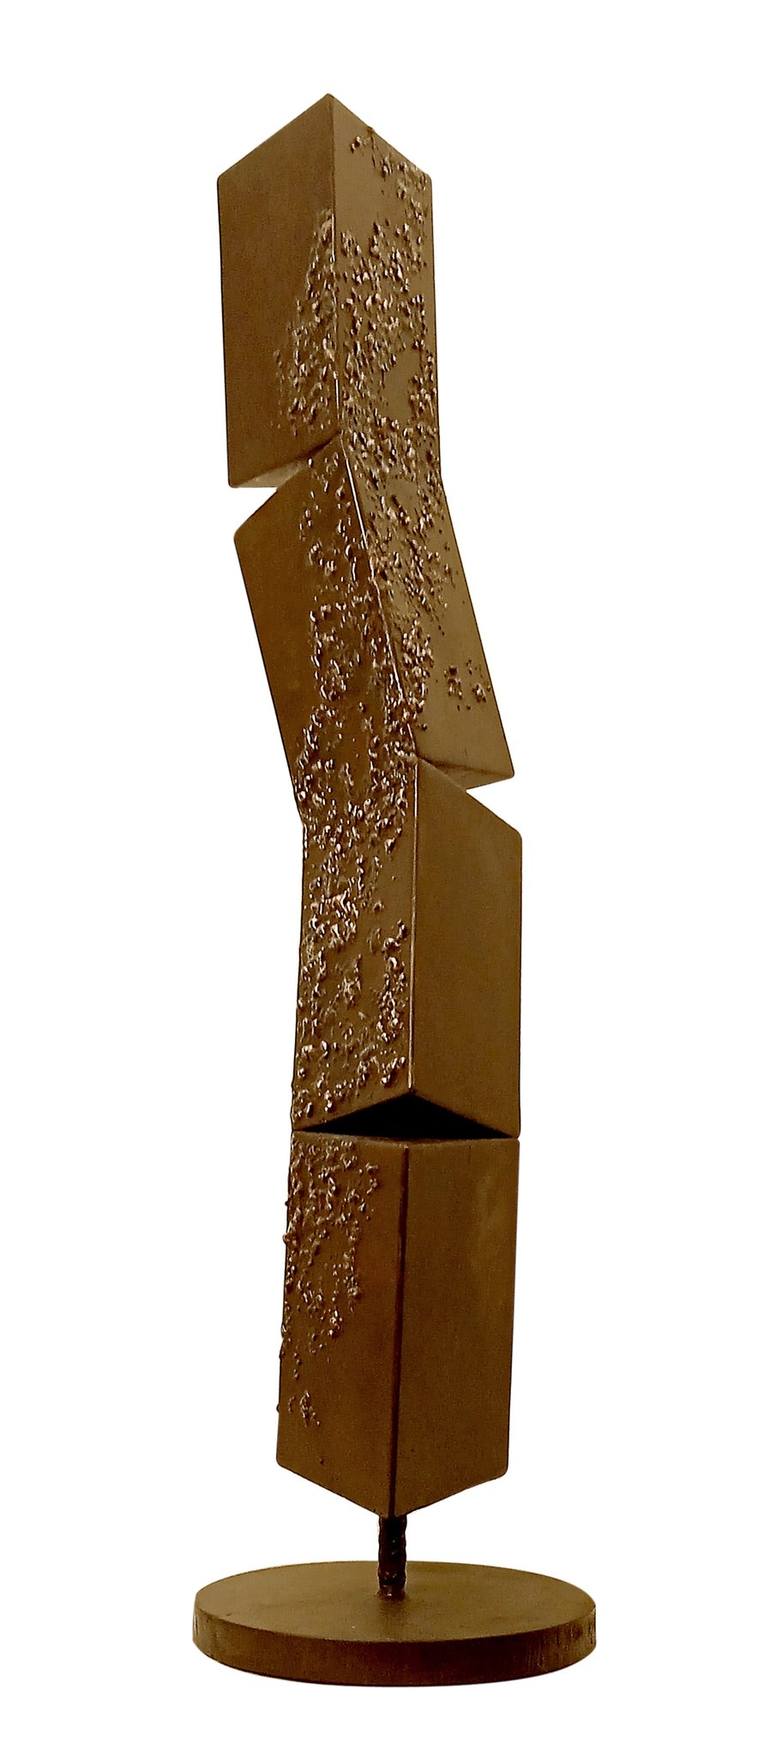 Original Abstract Sculpture by PAVLOVSKYDESIGN metal and paintings